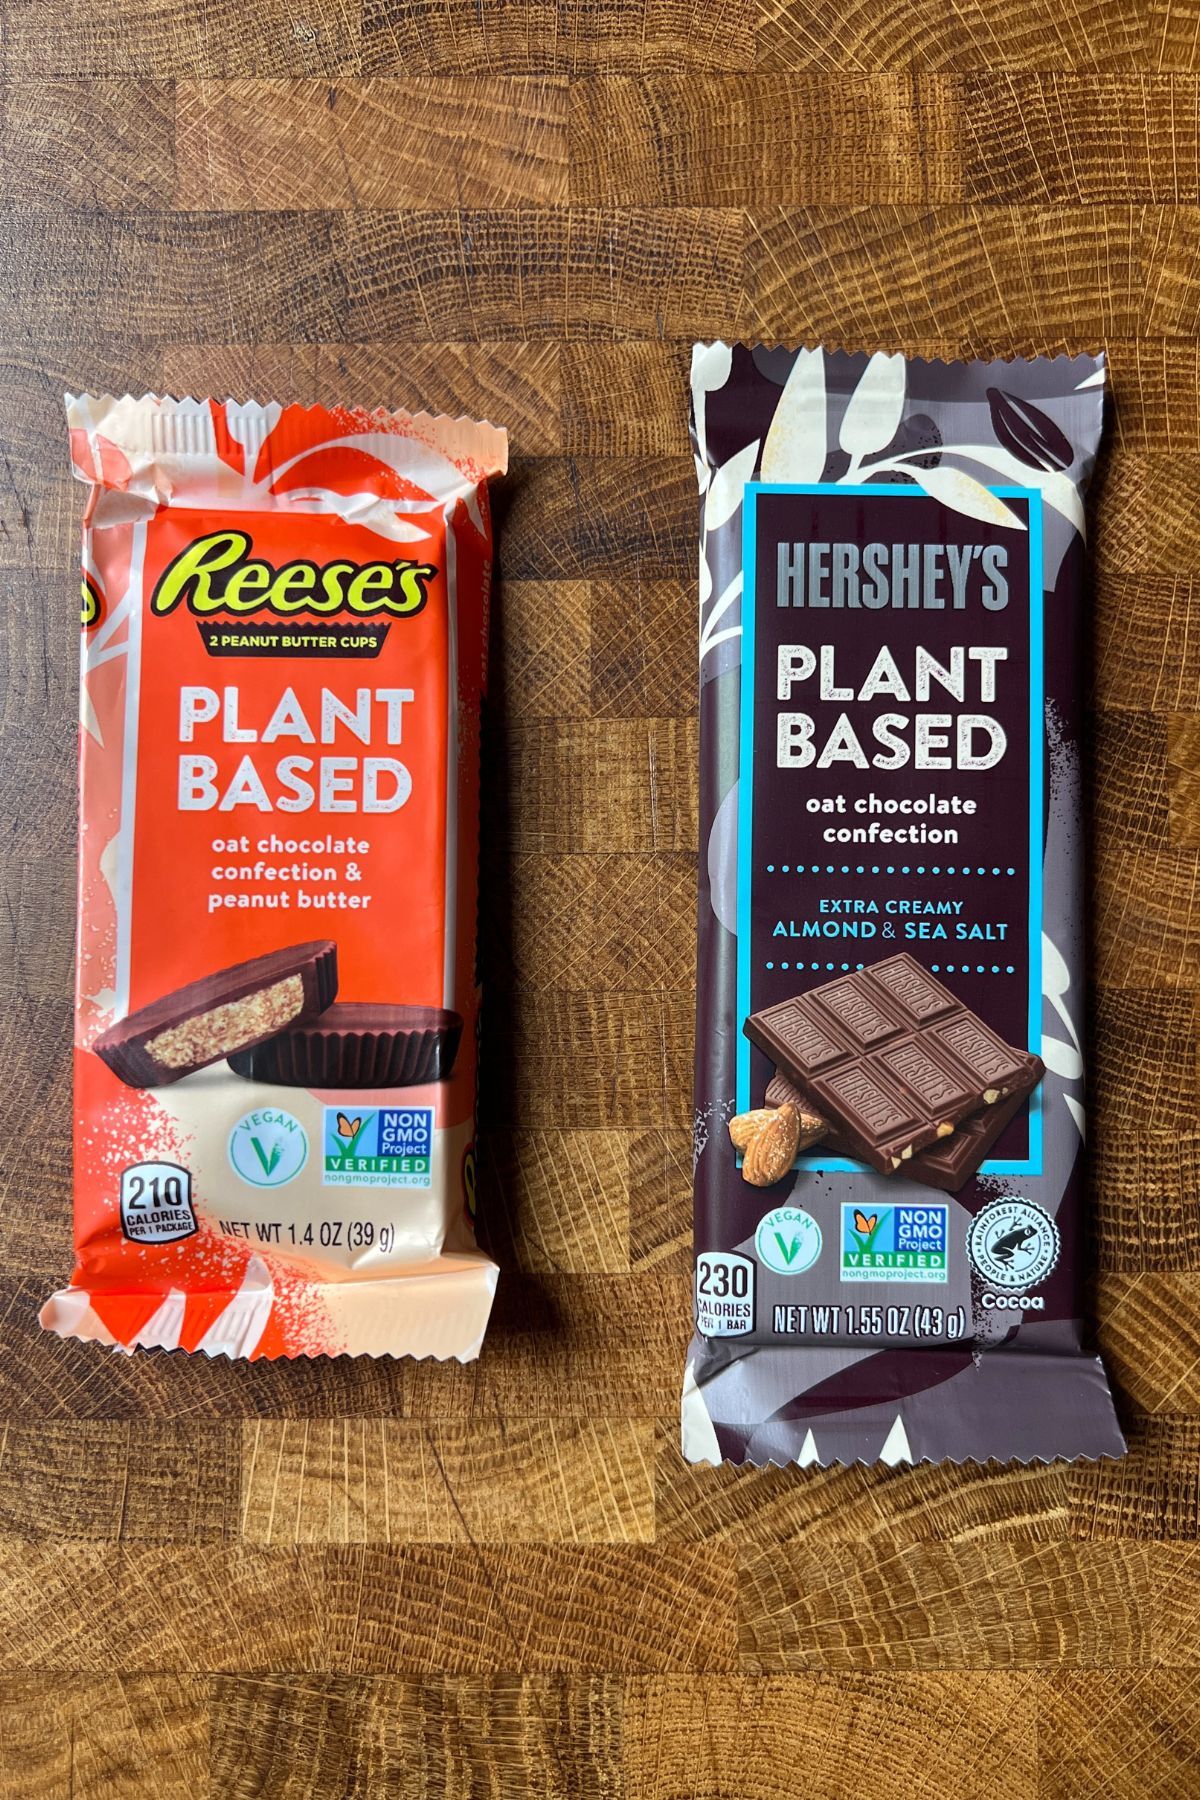 hersheys plant based chocolate bar and hershey reese's cup packages.